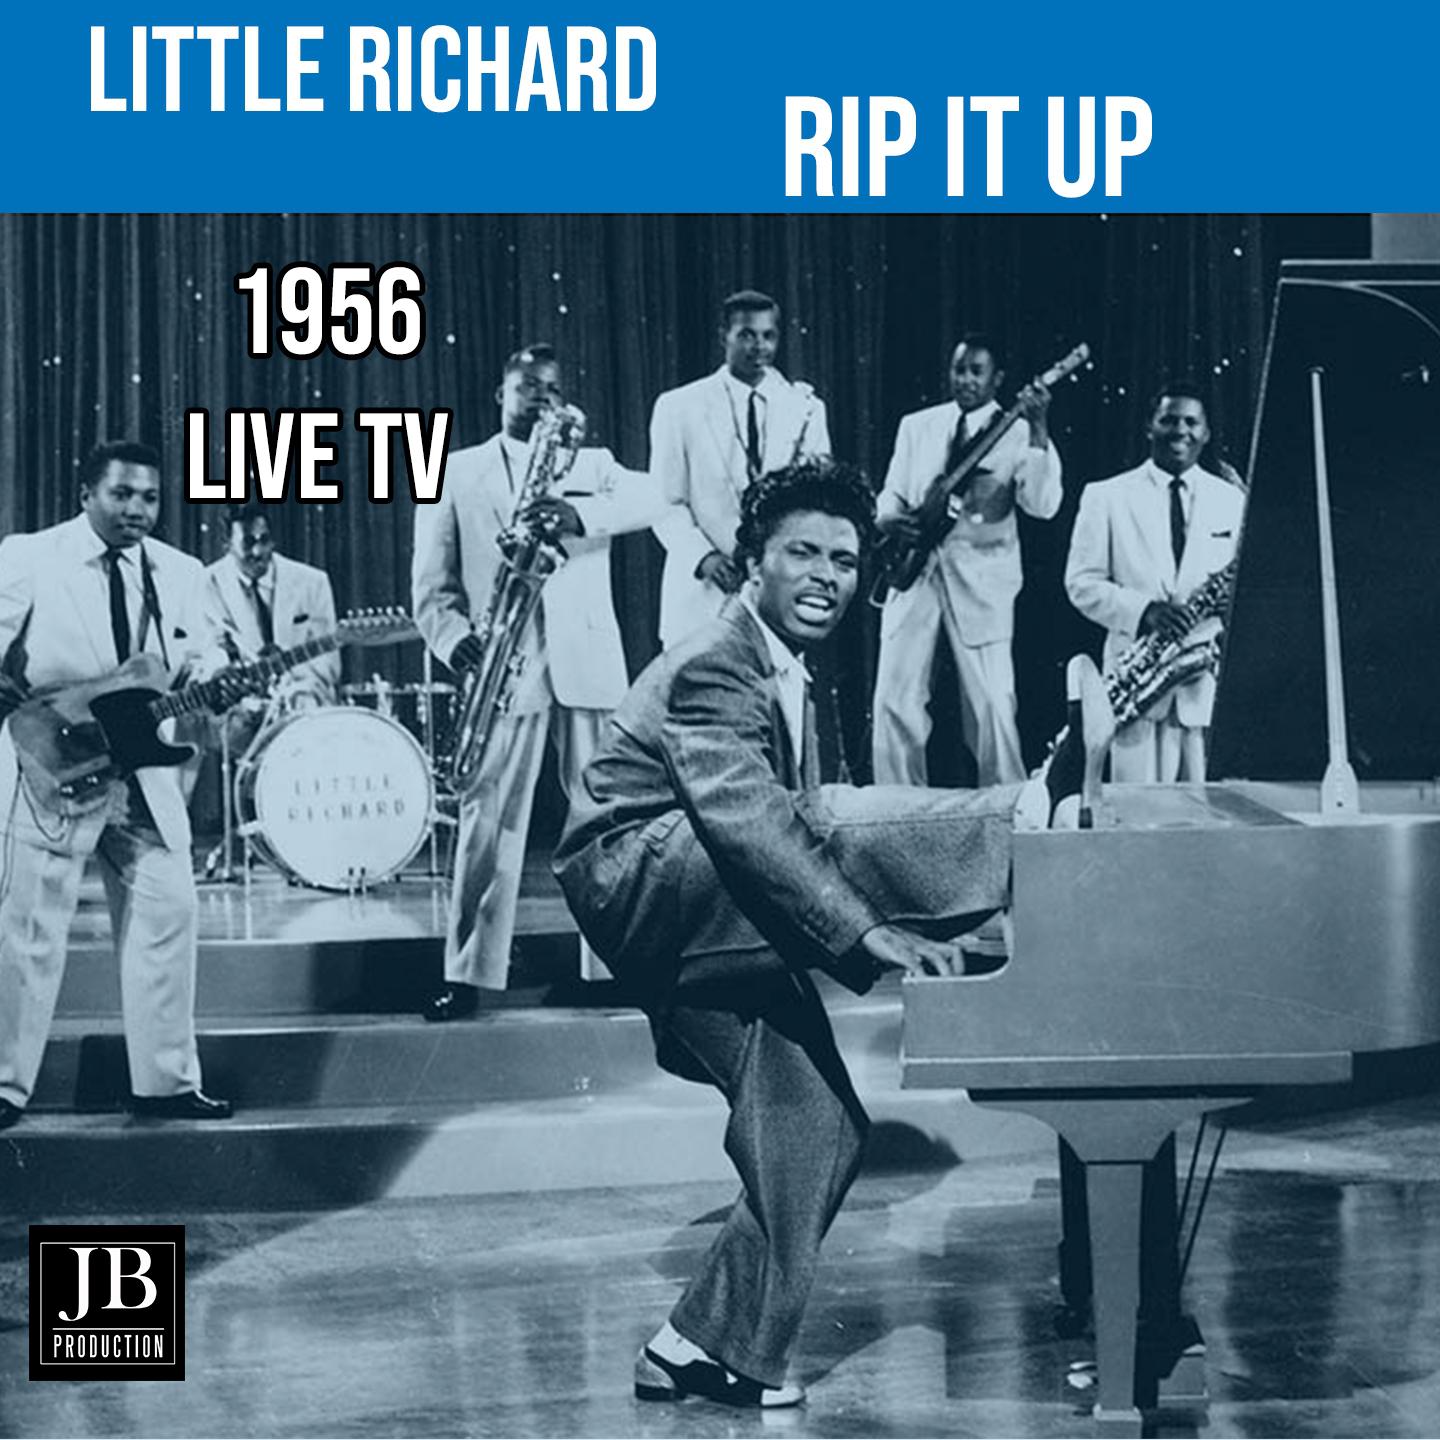 Rip It Up (1956 Live Tv Footage)